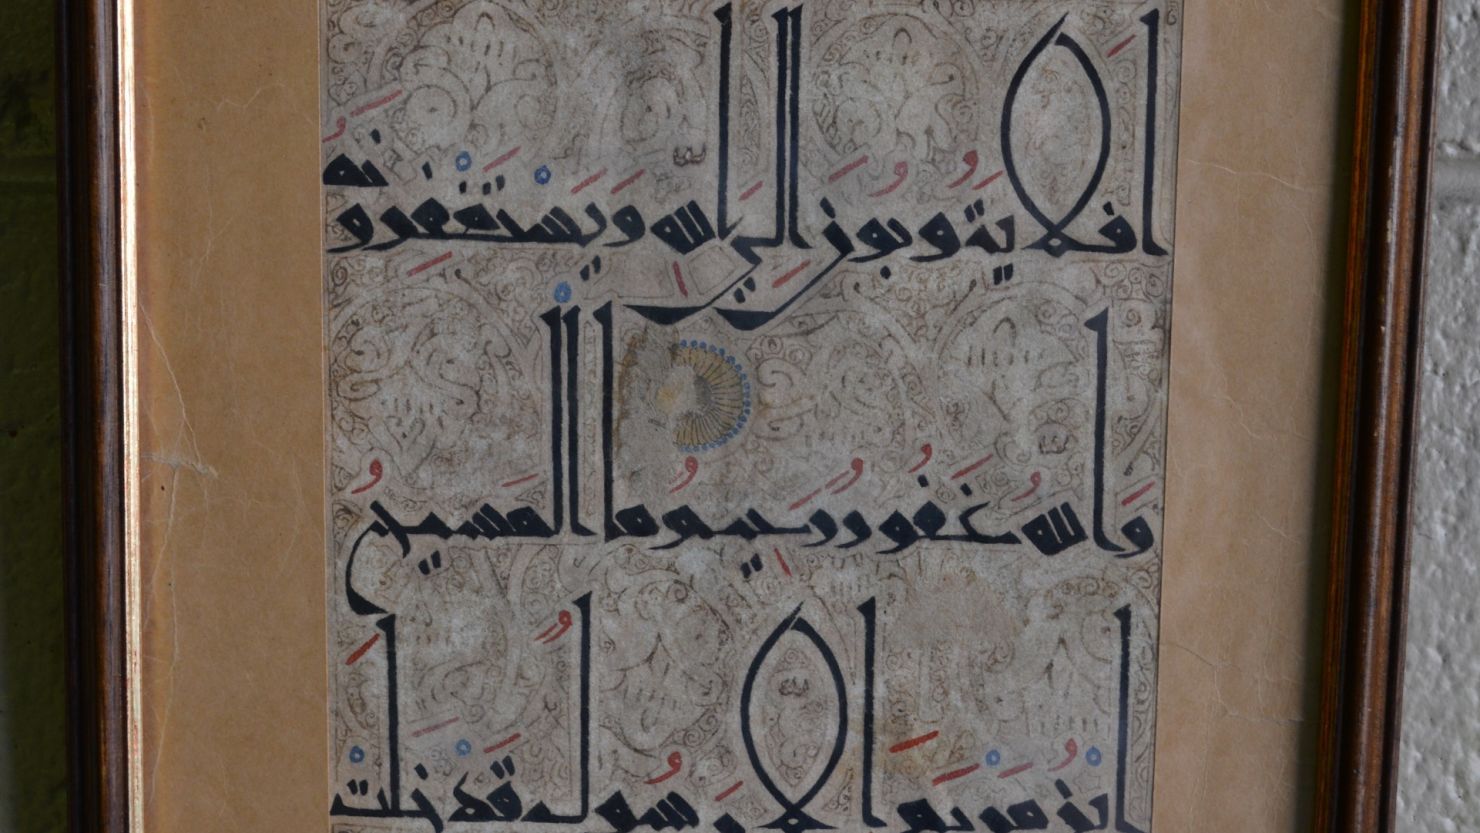 A single torn page believed to be from the Quran has sold for $68,000 at auction in Sydney.